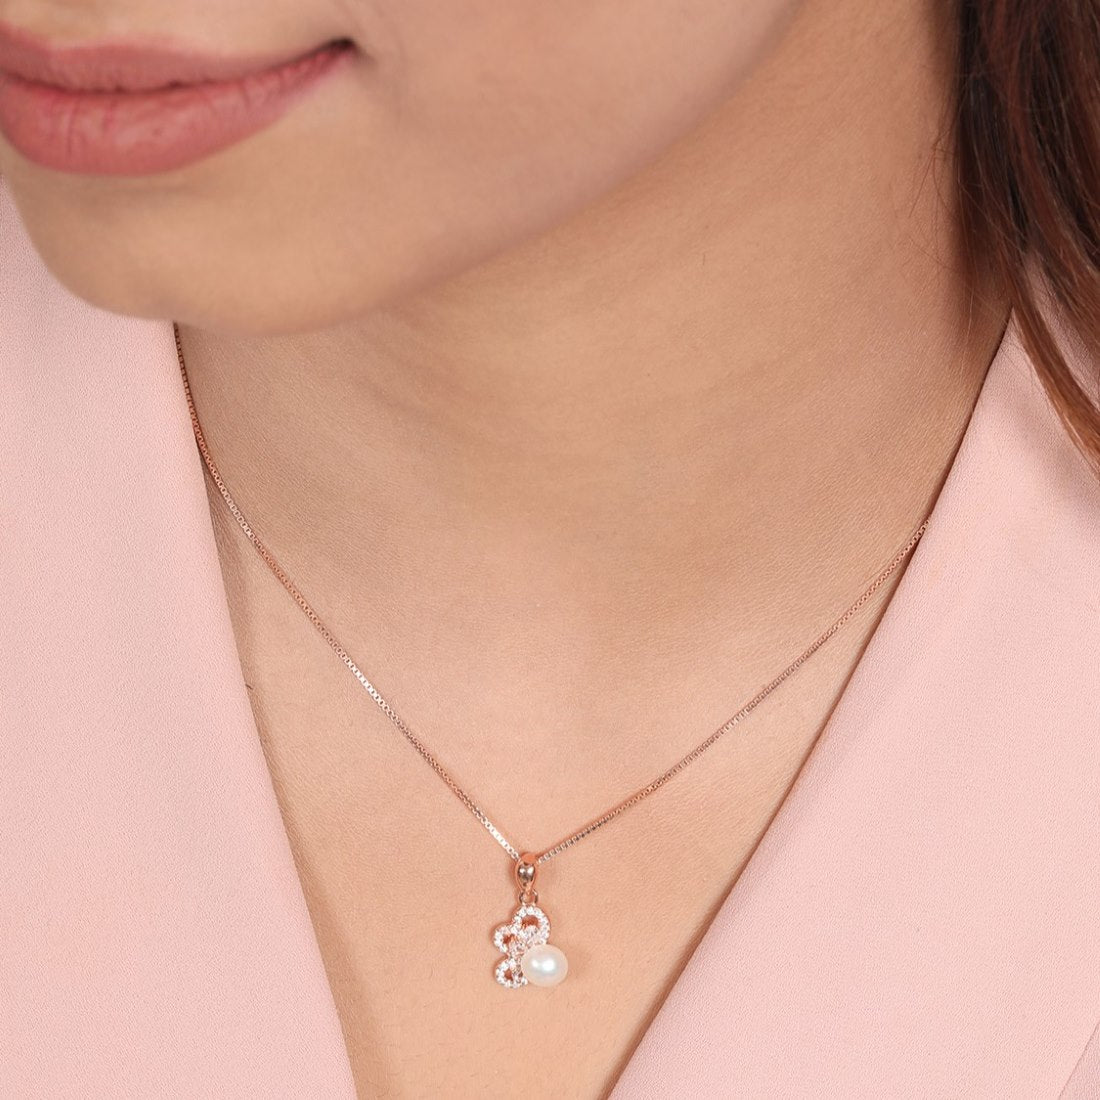 Petals in Bloom Pearl-CZ Rose Gold-Plated Half Flower Sterling Silver Pendant with Chain